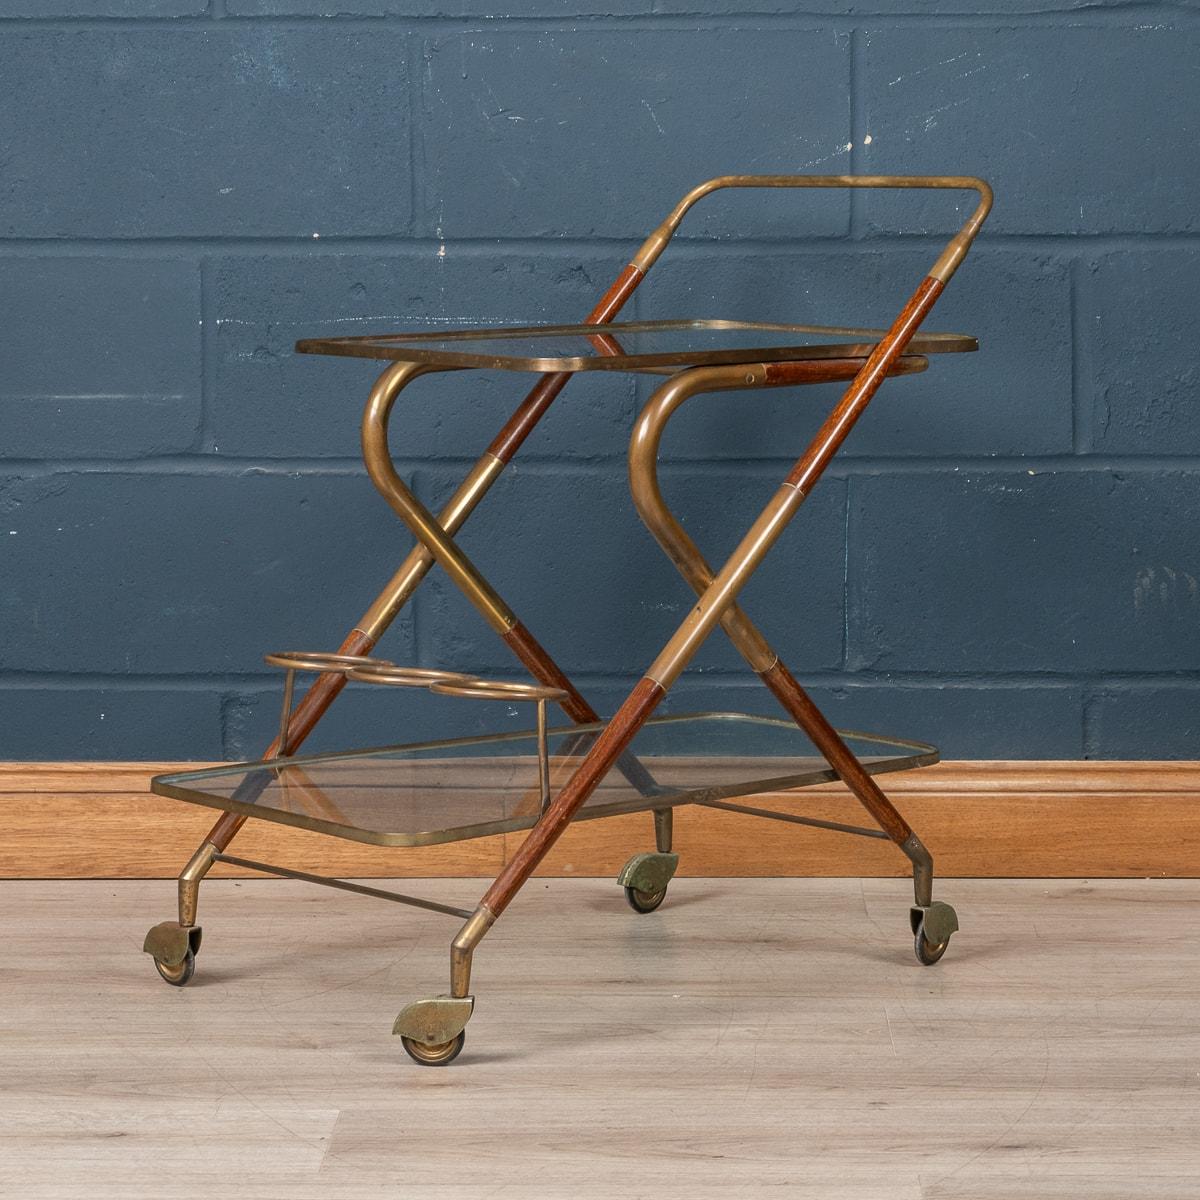 A delightful mid century Italian drinks trolley attributable to Cesare Lacca. The two tier cart is realised entirely out of teak and is a typical design of the 1950s/60s. The two glass shelves cradled perfectly by the teak frame with brass